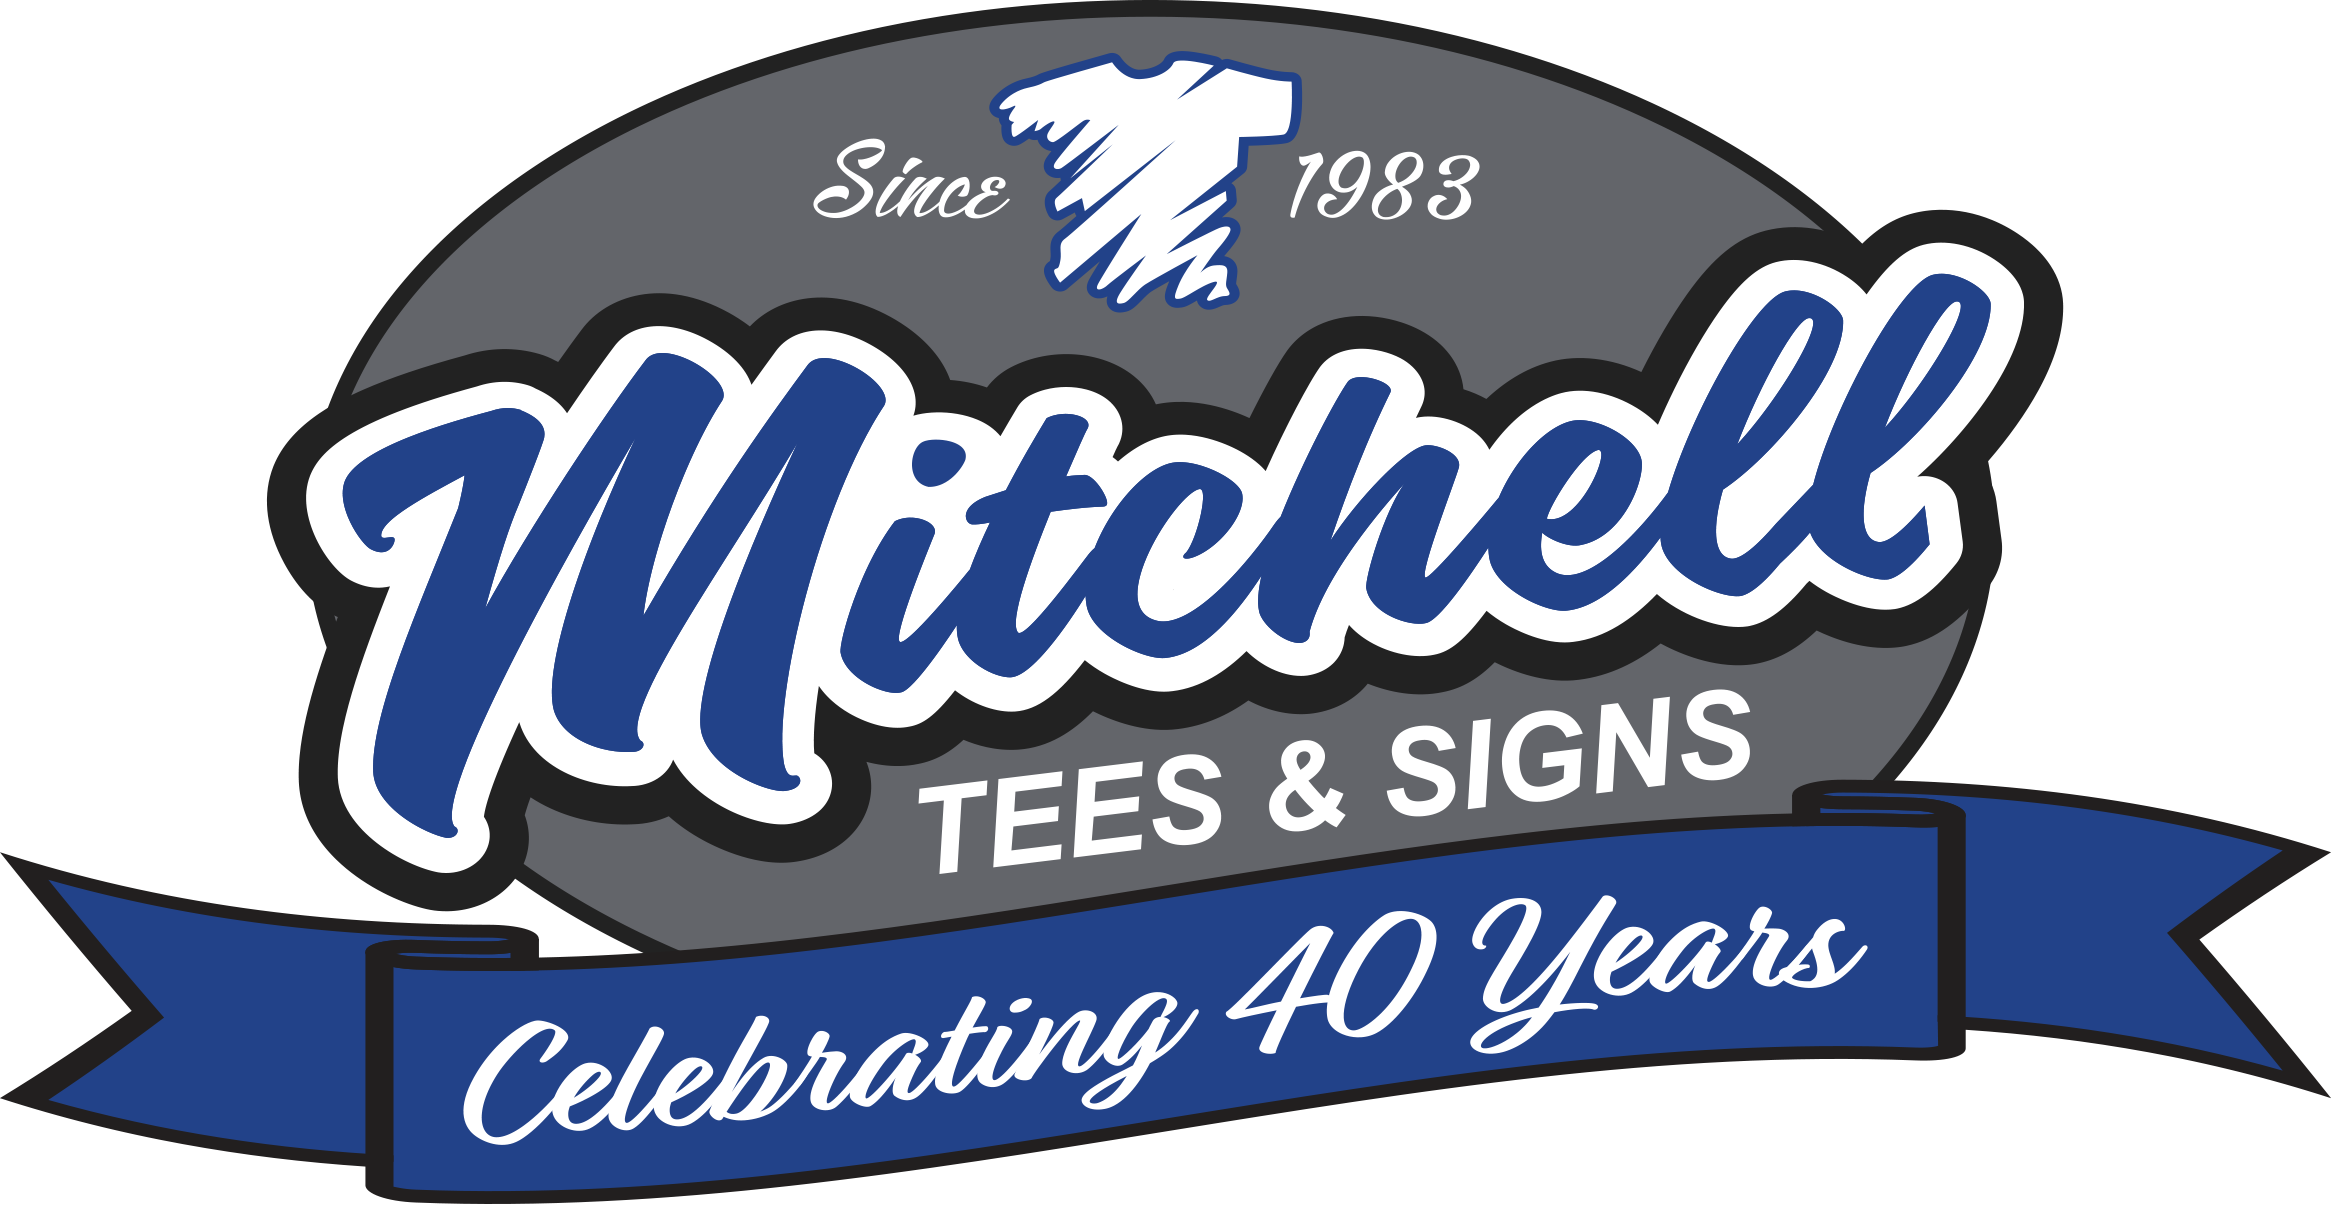 Mitchell Tees & Signs